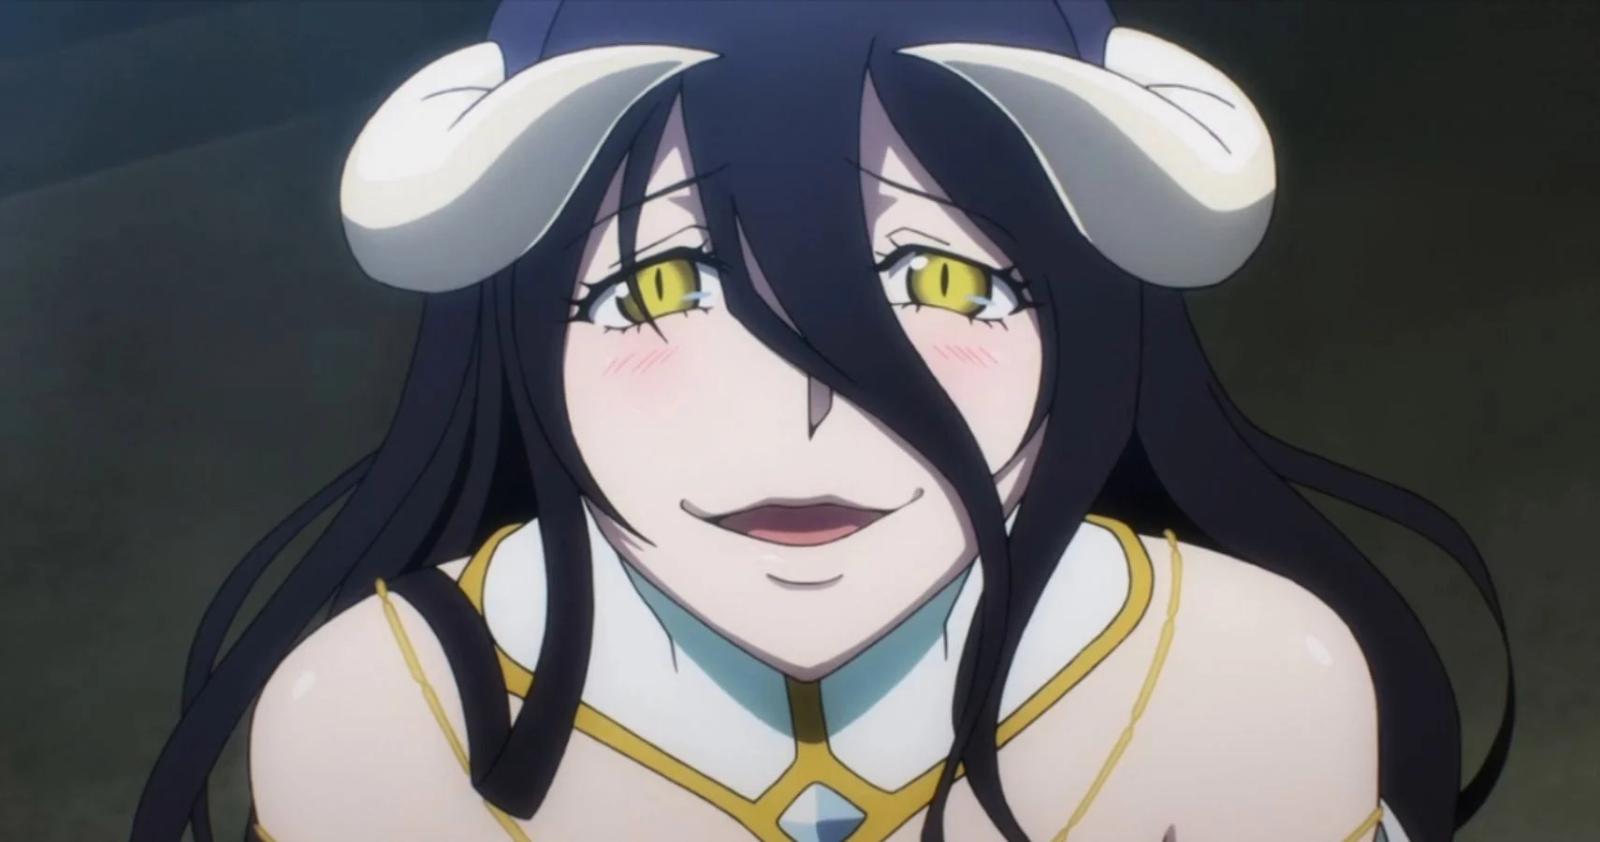 Do Ainz and Albedo Get Together in Overlord? -Who is Albedo in Overlord?